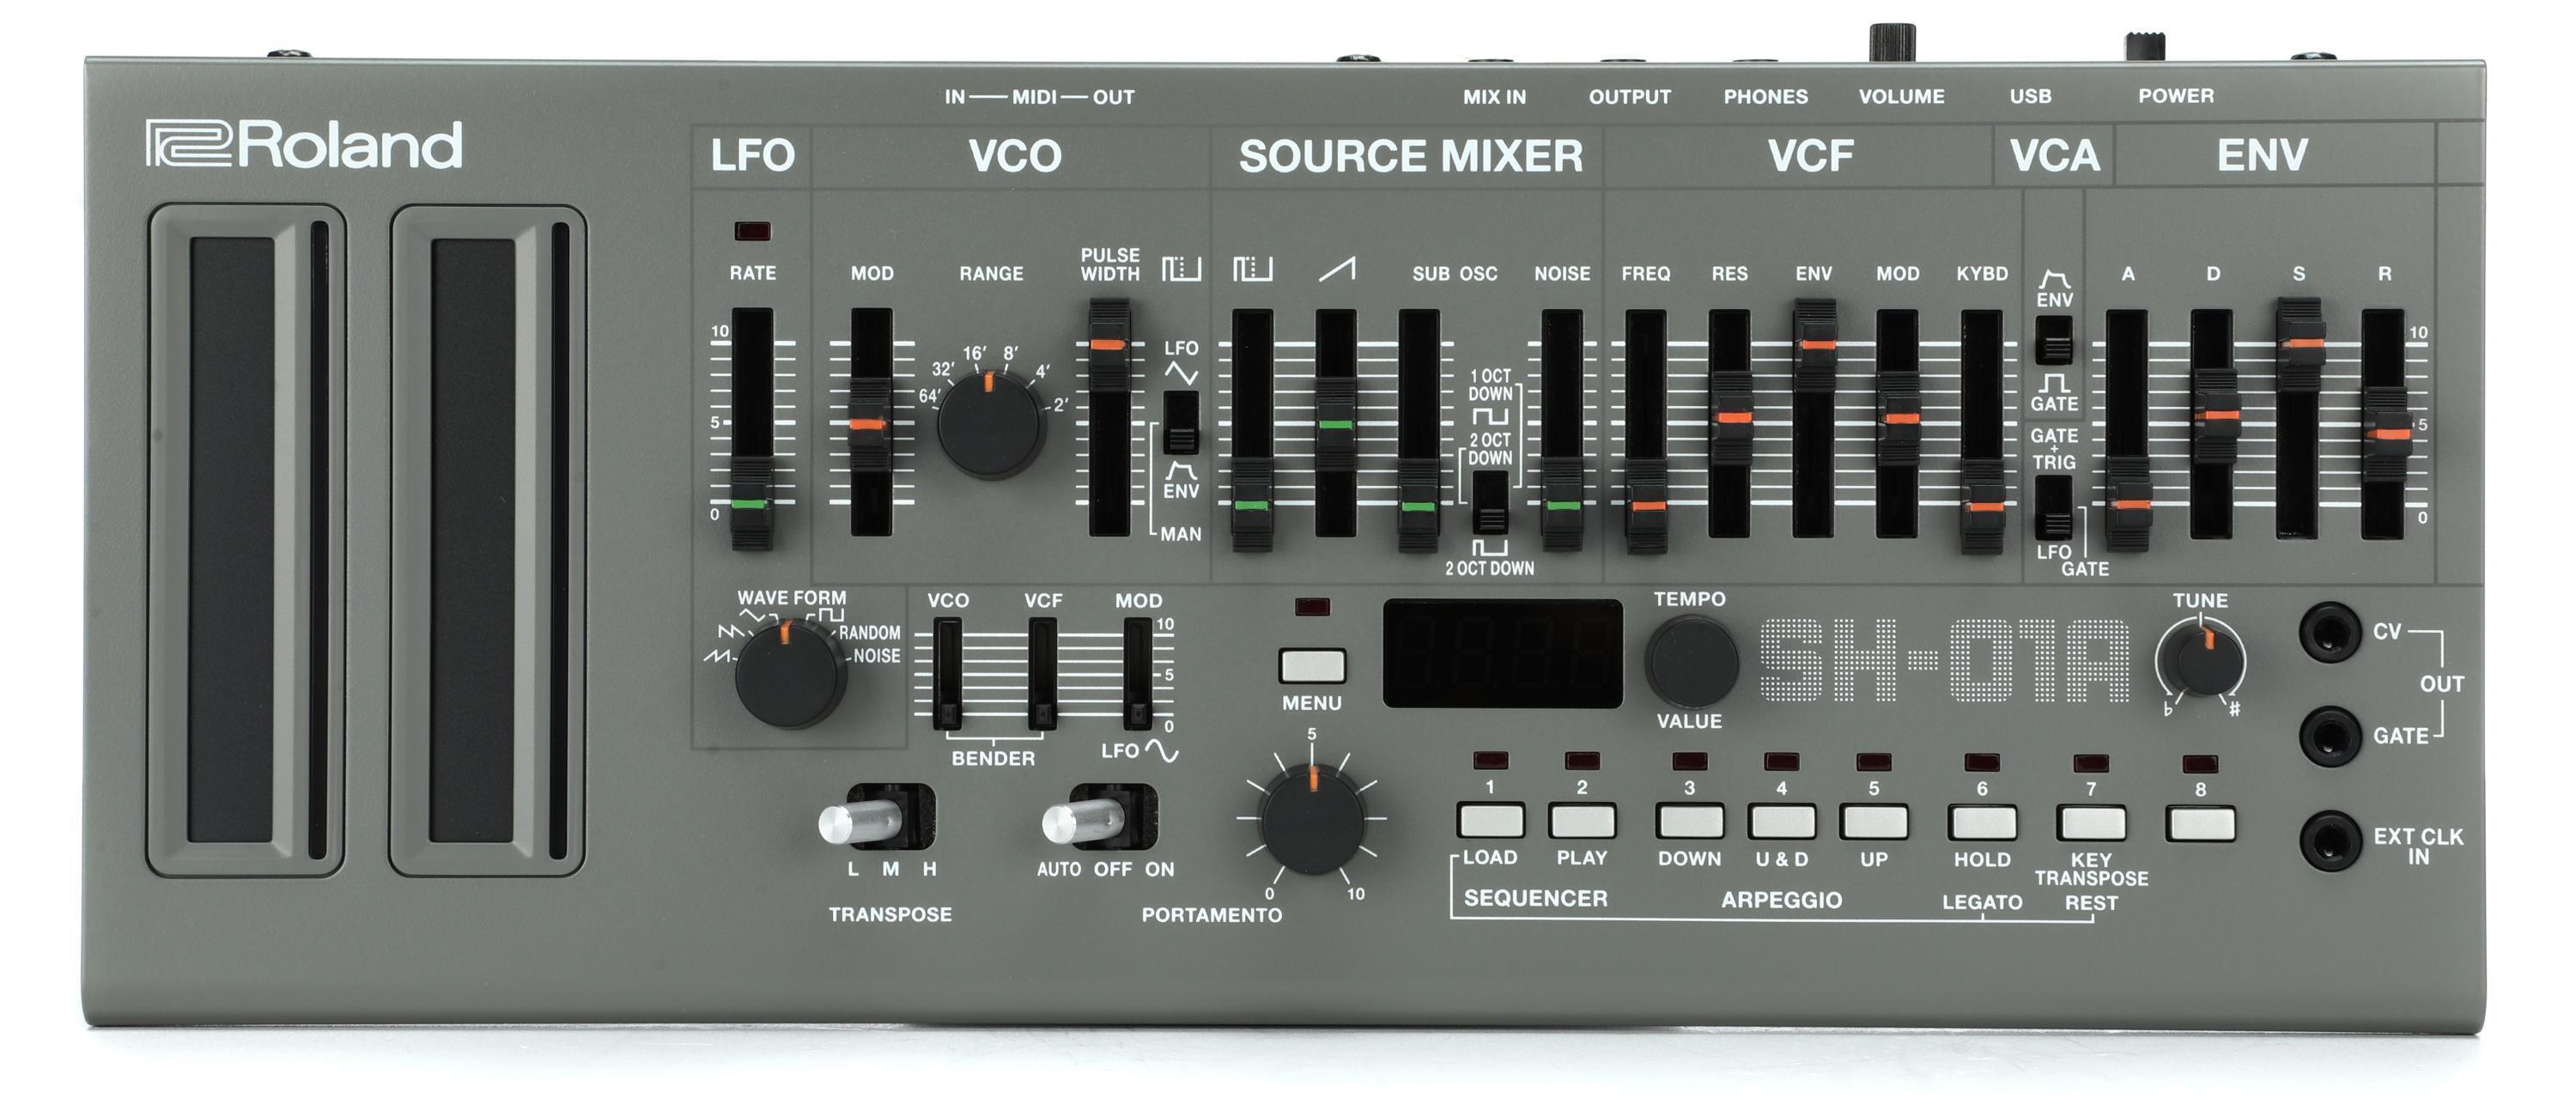 Roland SH-01A Boutique Series Synthesizer with Sequencer | Sweetwater